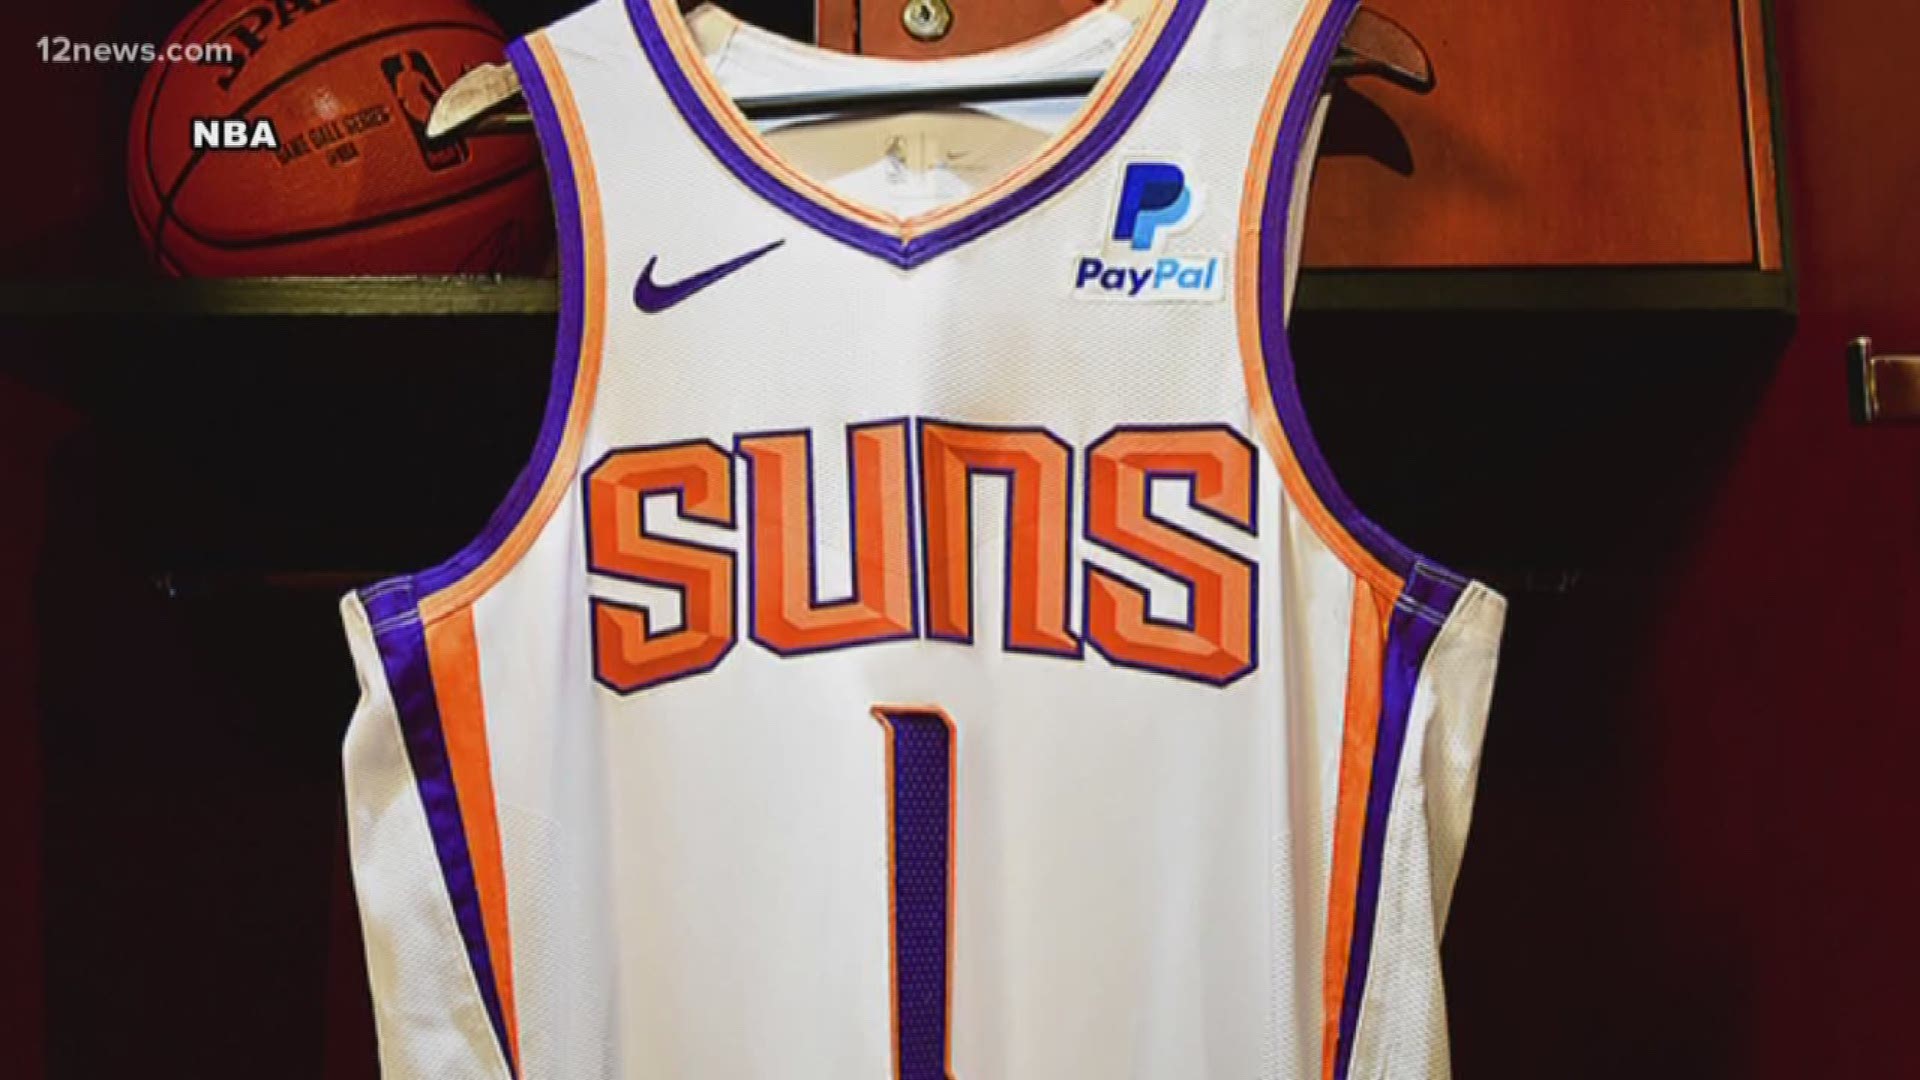 Brand equity matters so much even t he Phoenix Suns bought in with PayPal to explore alternative revenue streams.